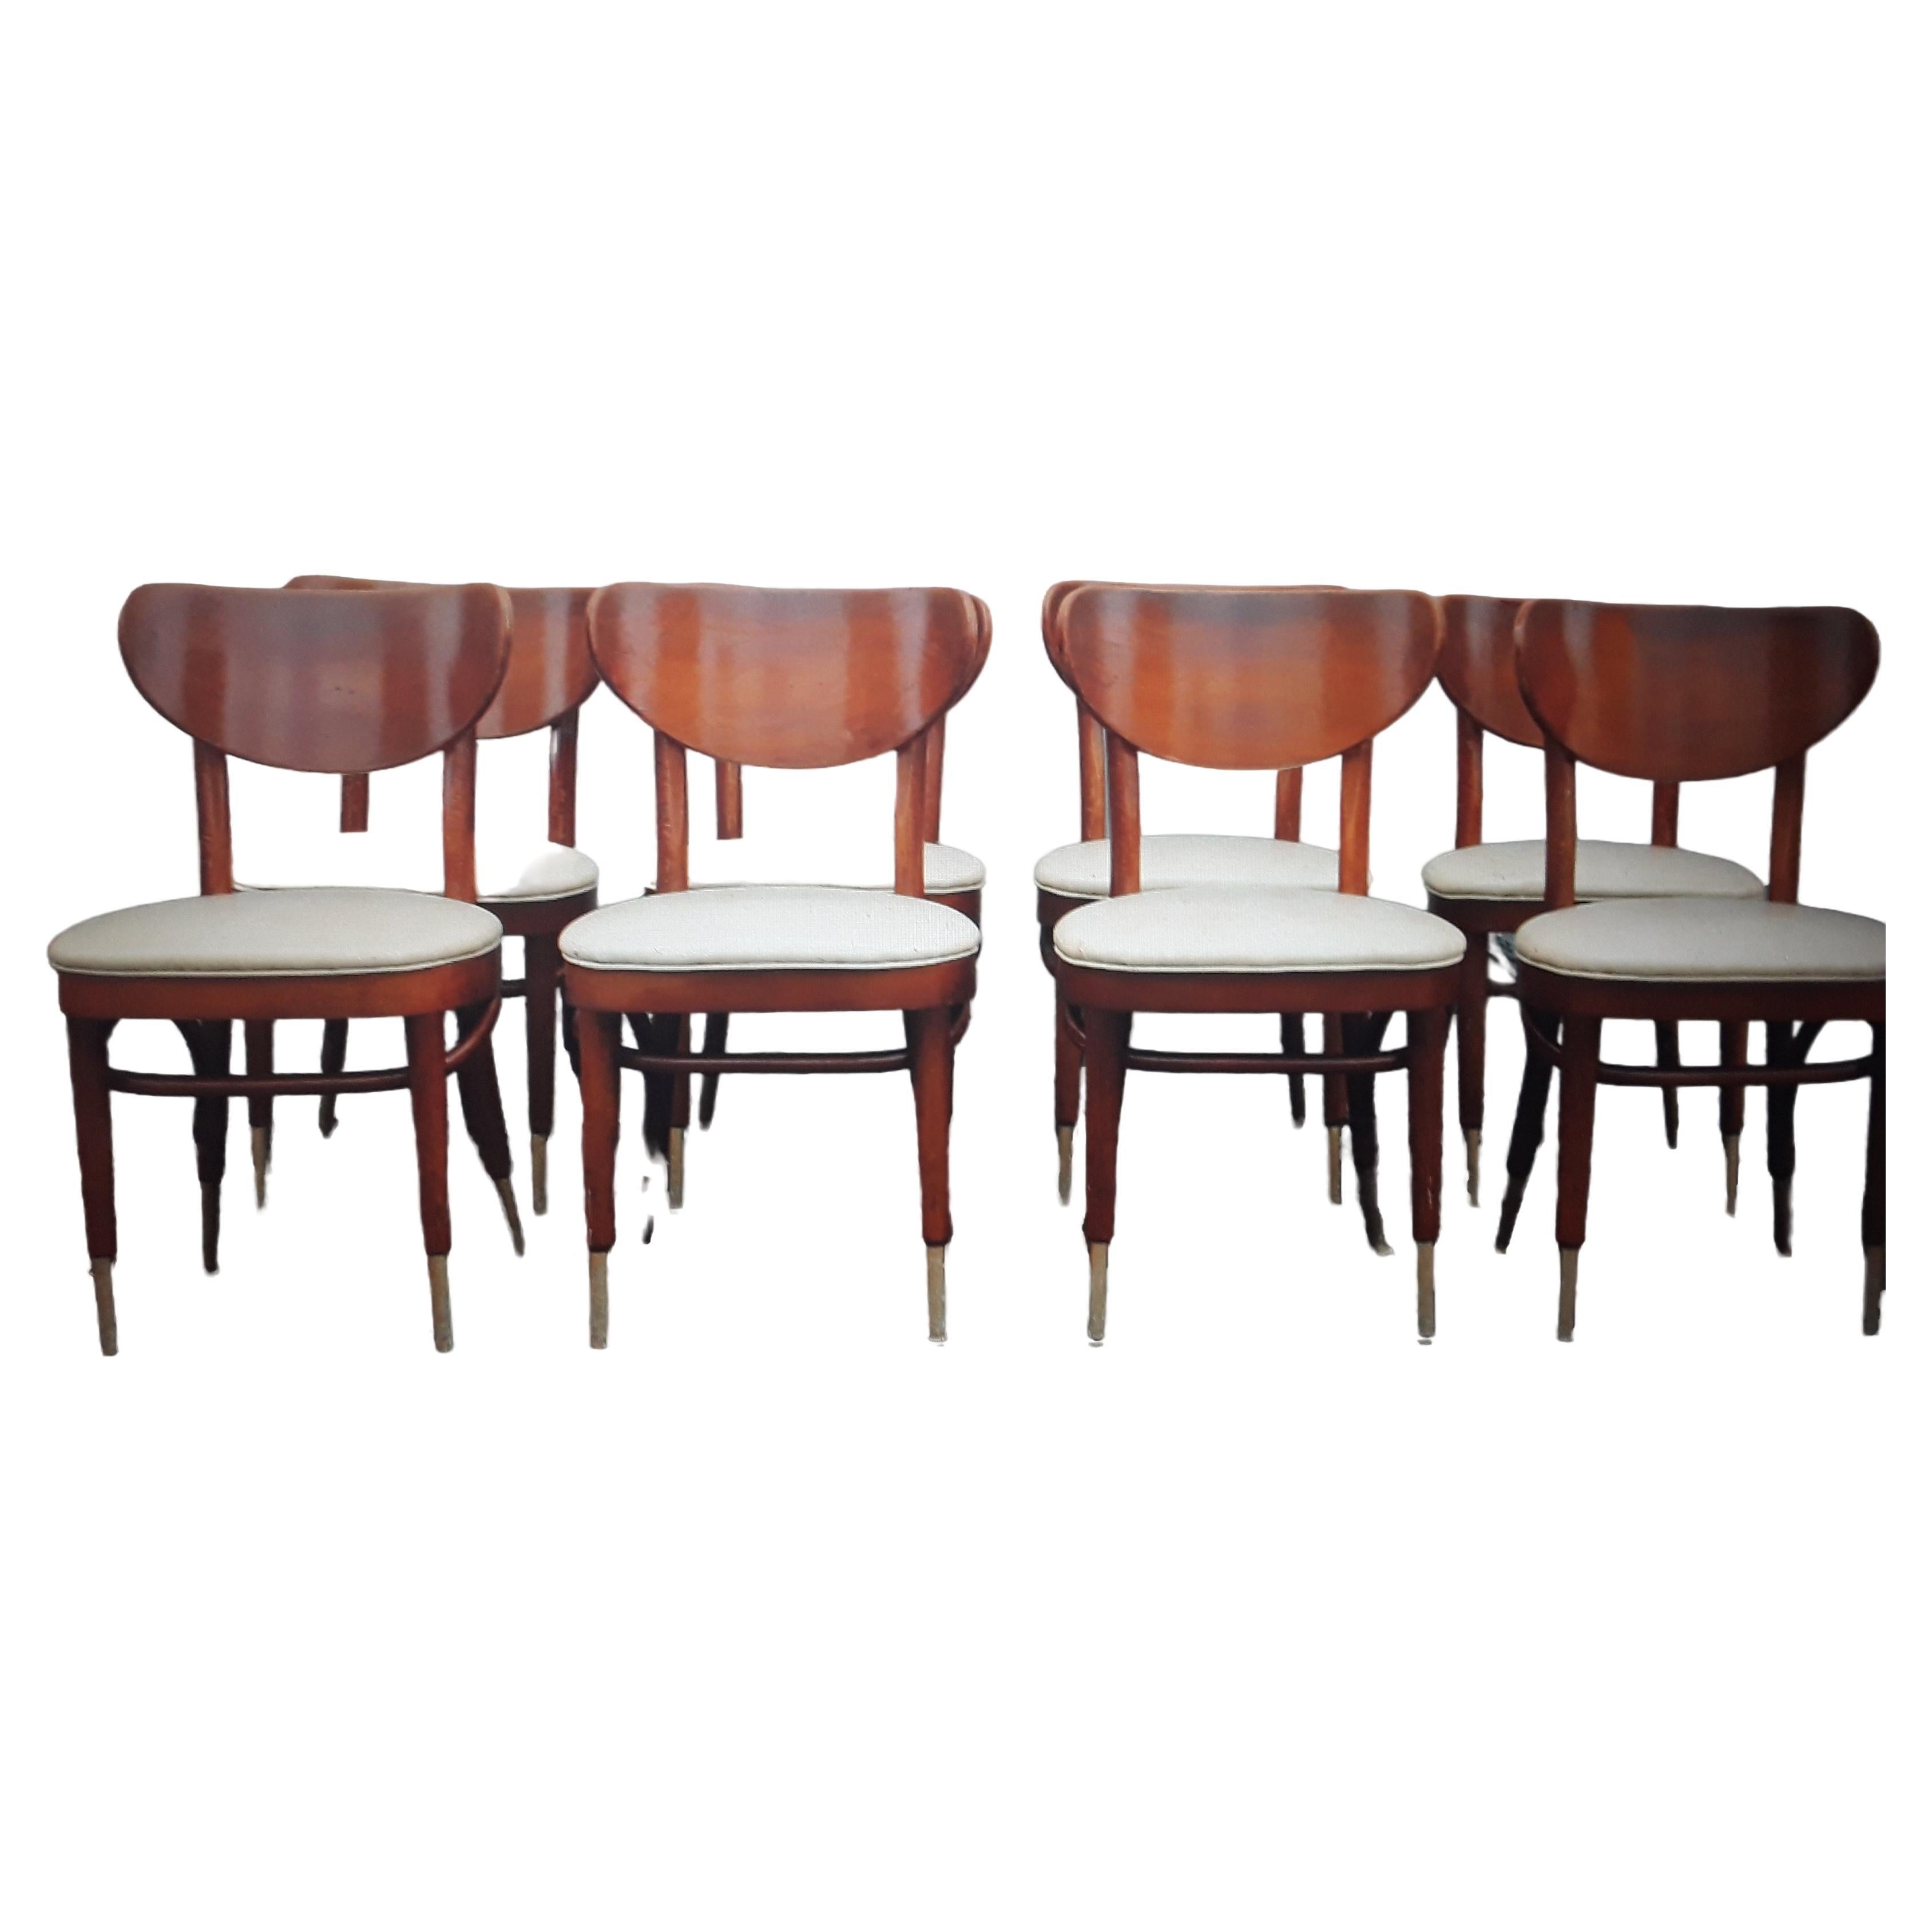 Set of 6 Mid Century Modern "George Jetson" style Bent Wood Dining Chairs